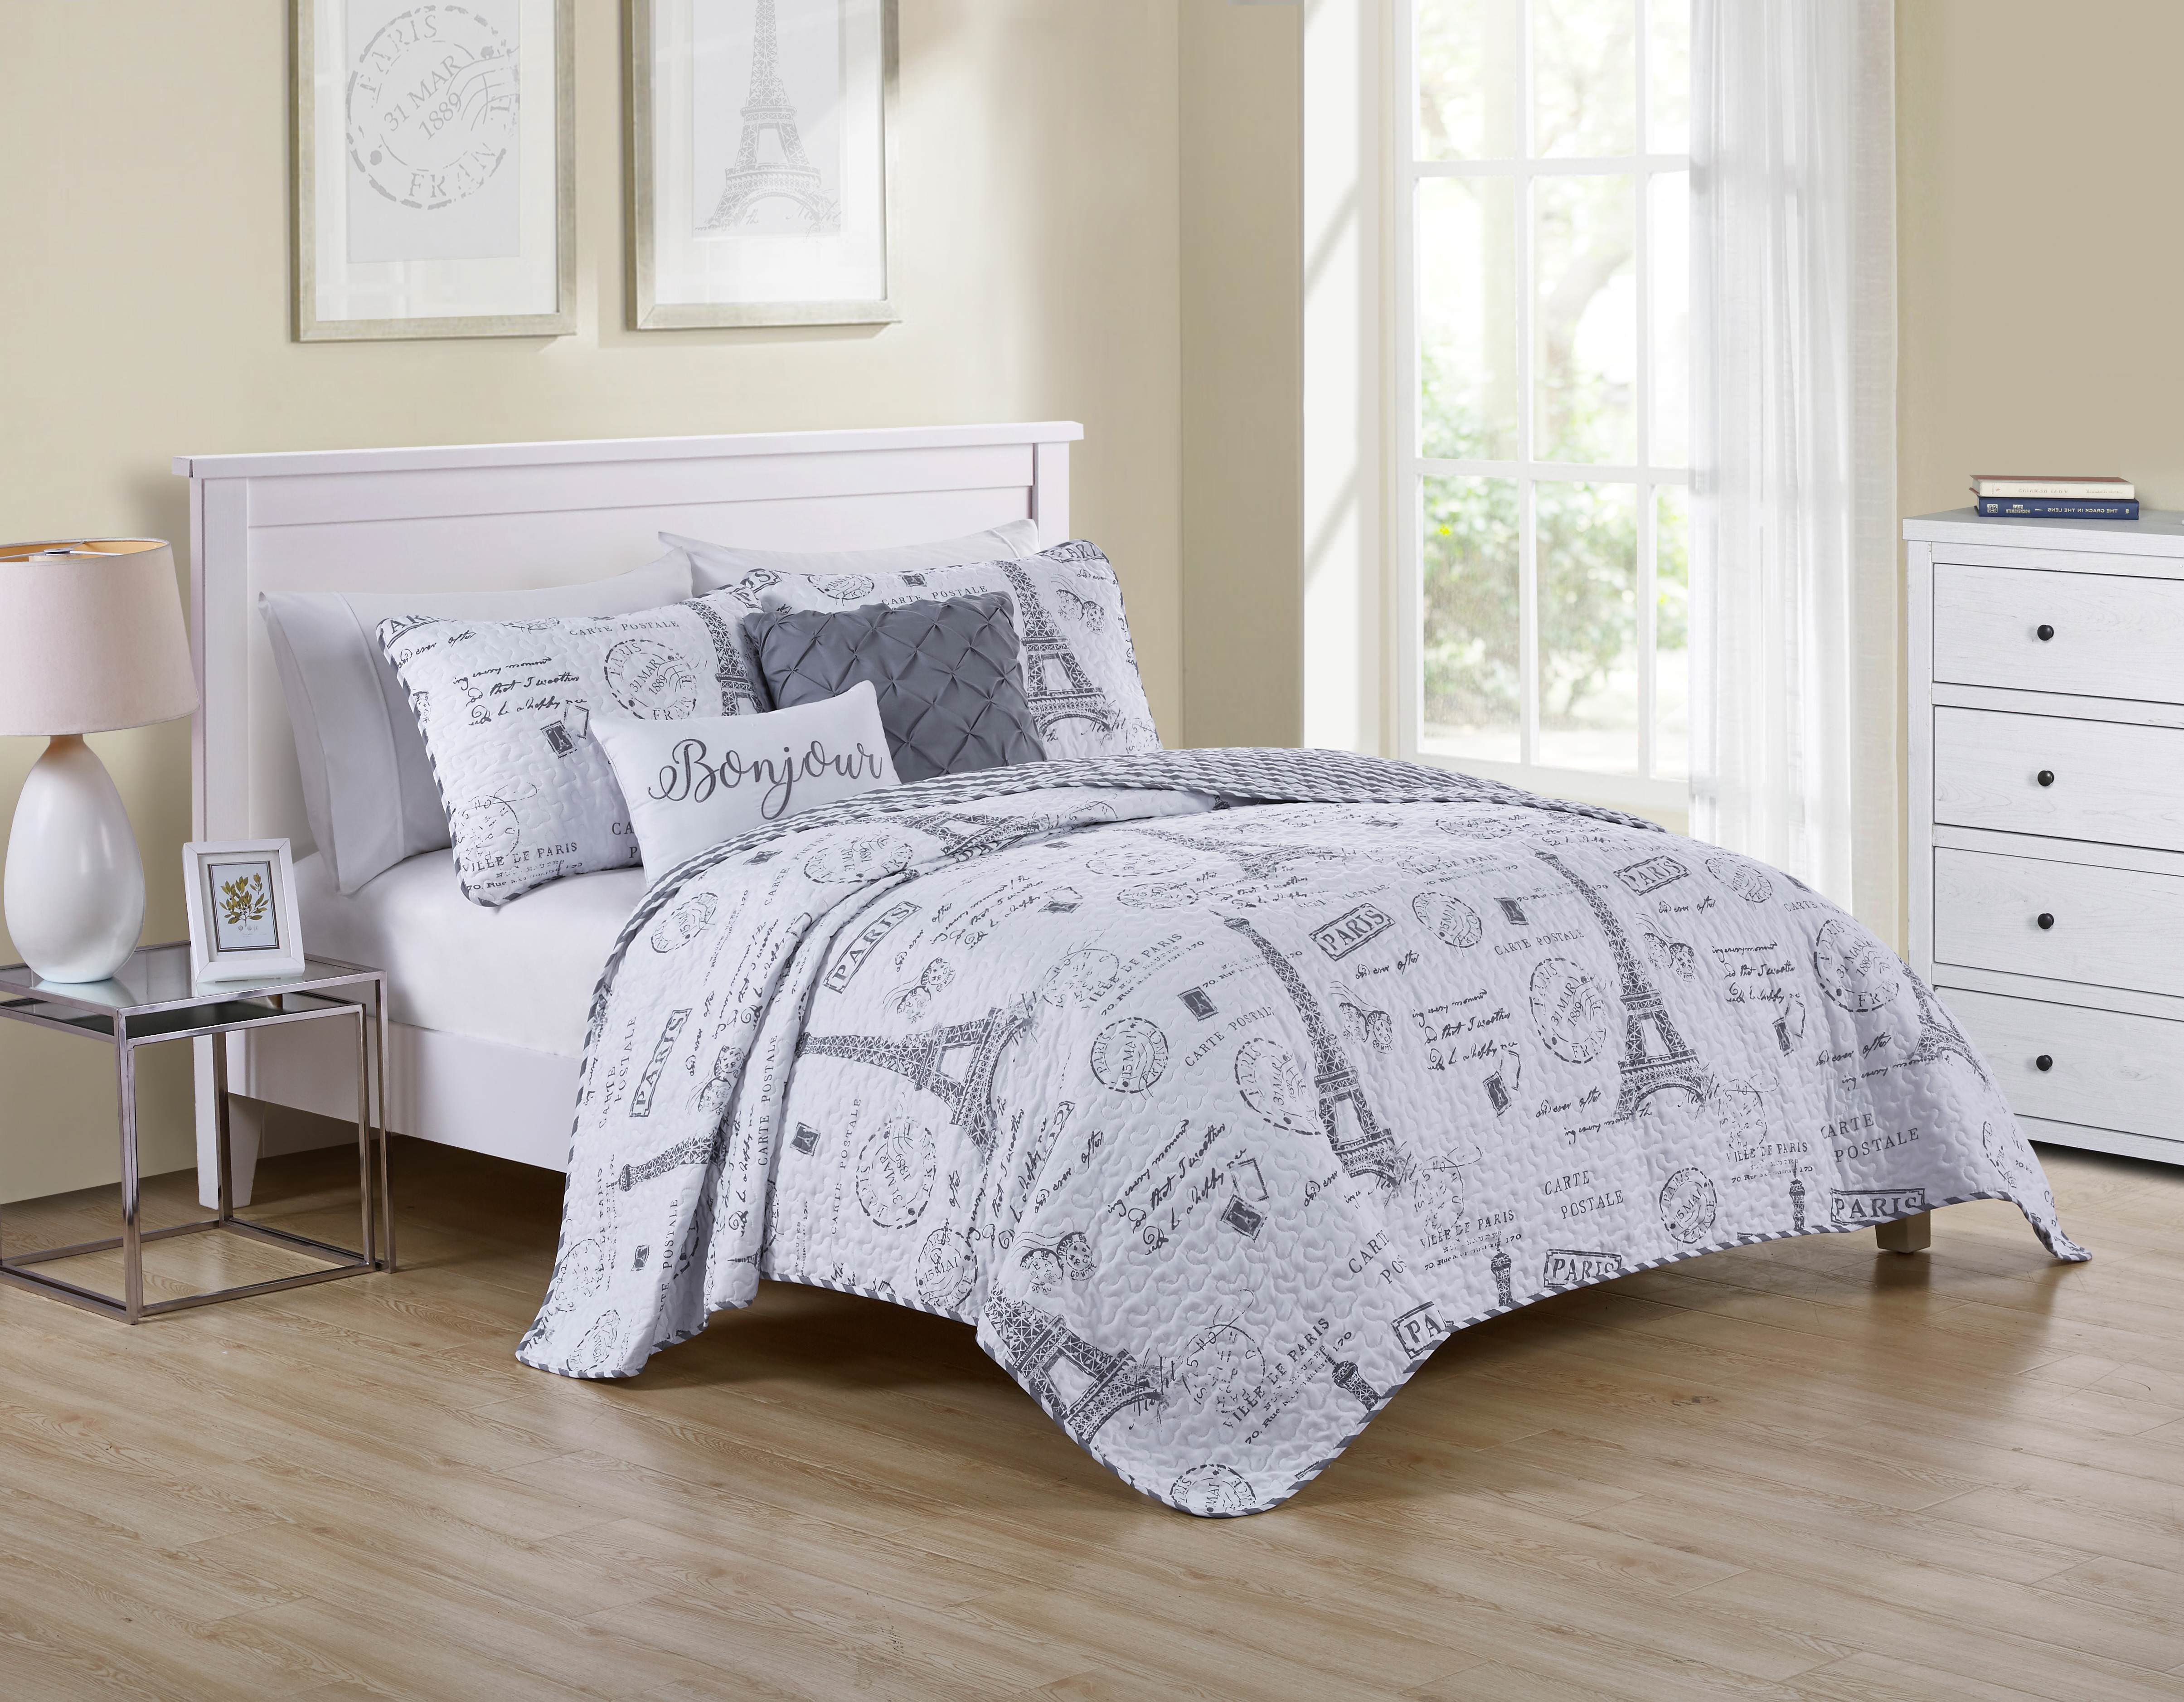 Abstract French Landmarks Print Details about   Paris Quilted Bedspread & Pillow Shams Set 